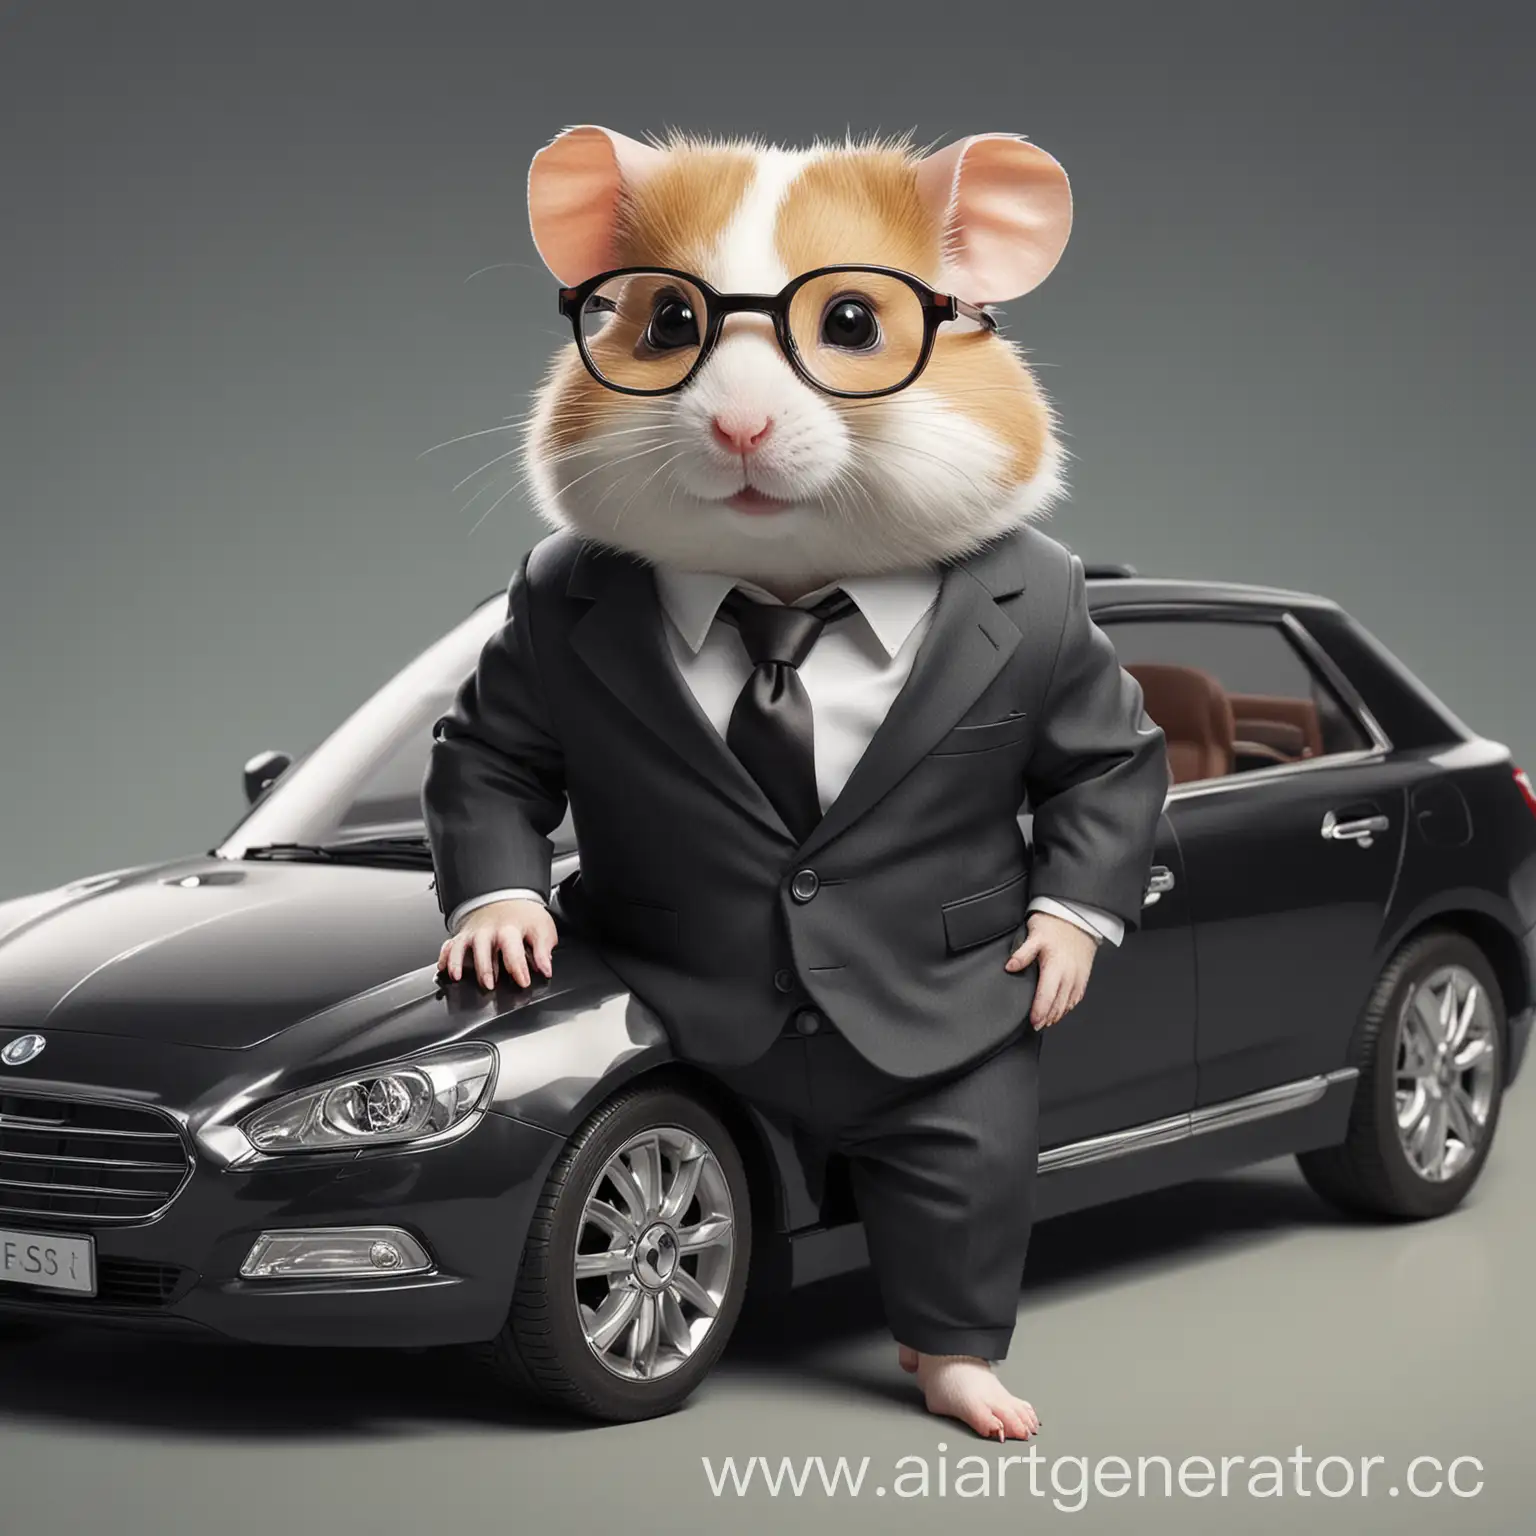 Hamster-in-Glasses-and-Business-Suit-Next-to-Fancy-Car